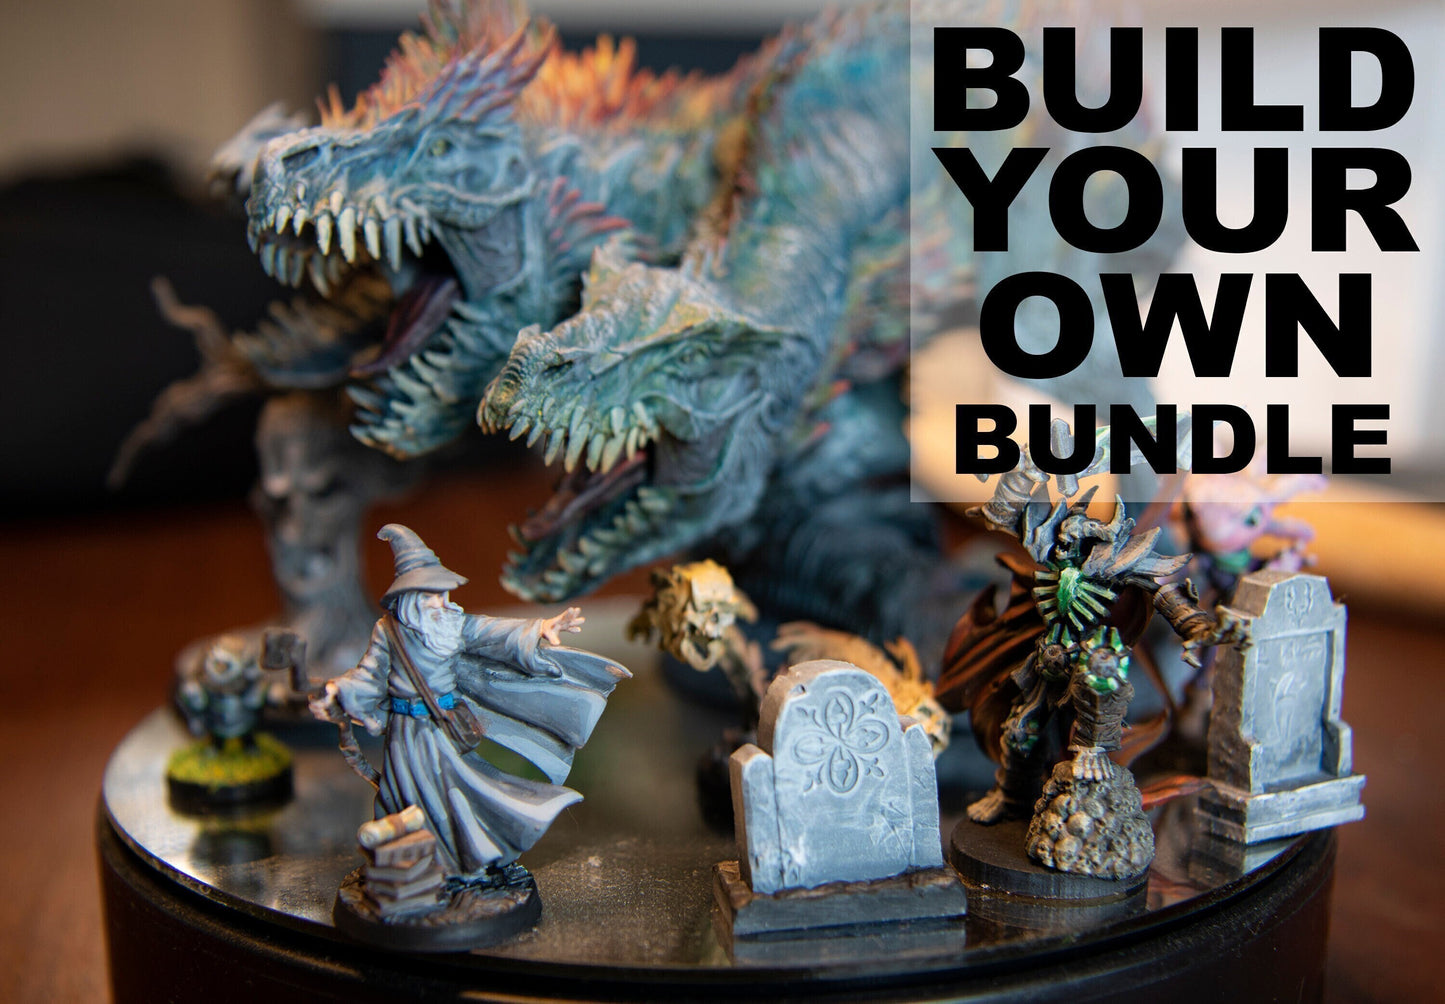 Build Your Own Bundle - Small models - For Table Top Gaming | Dungeons & Dragons | Pathfinder